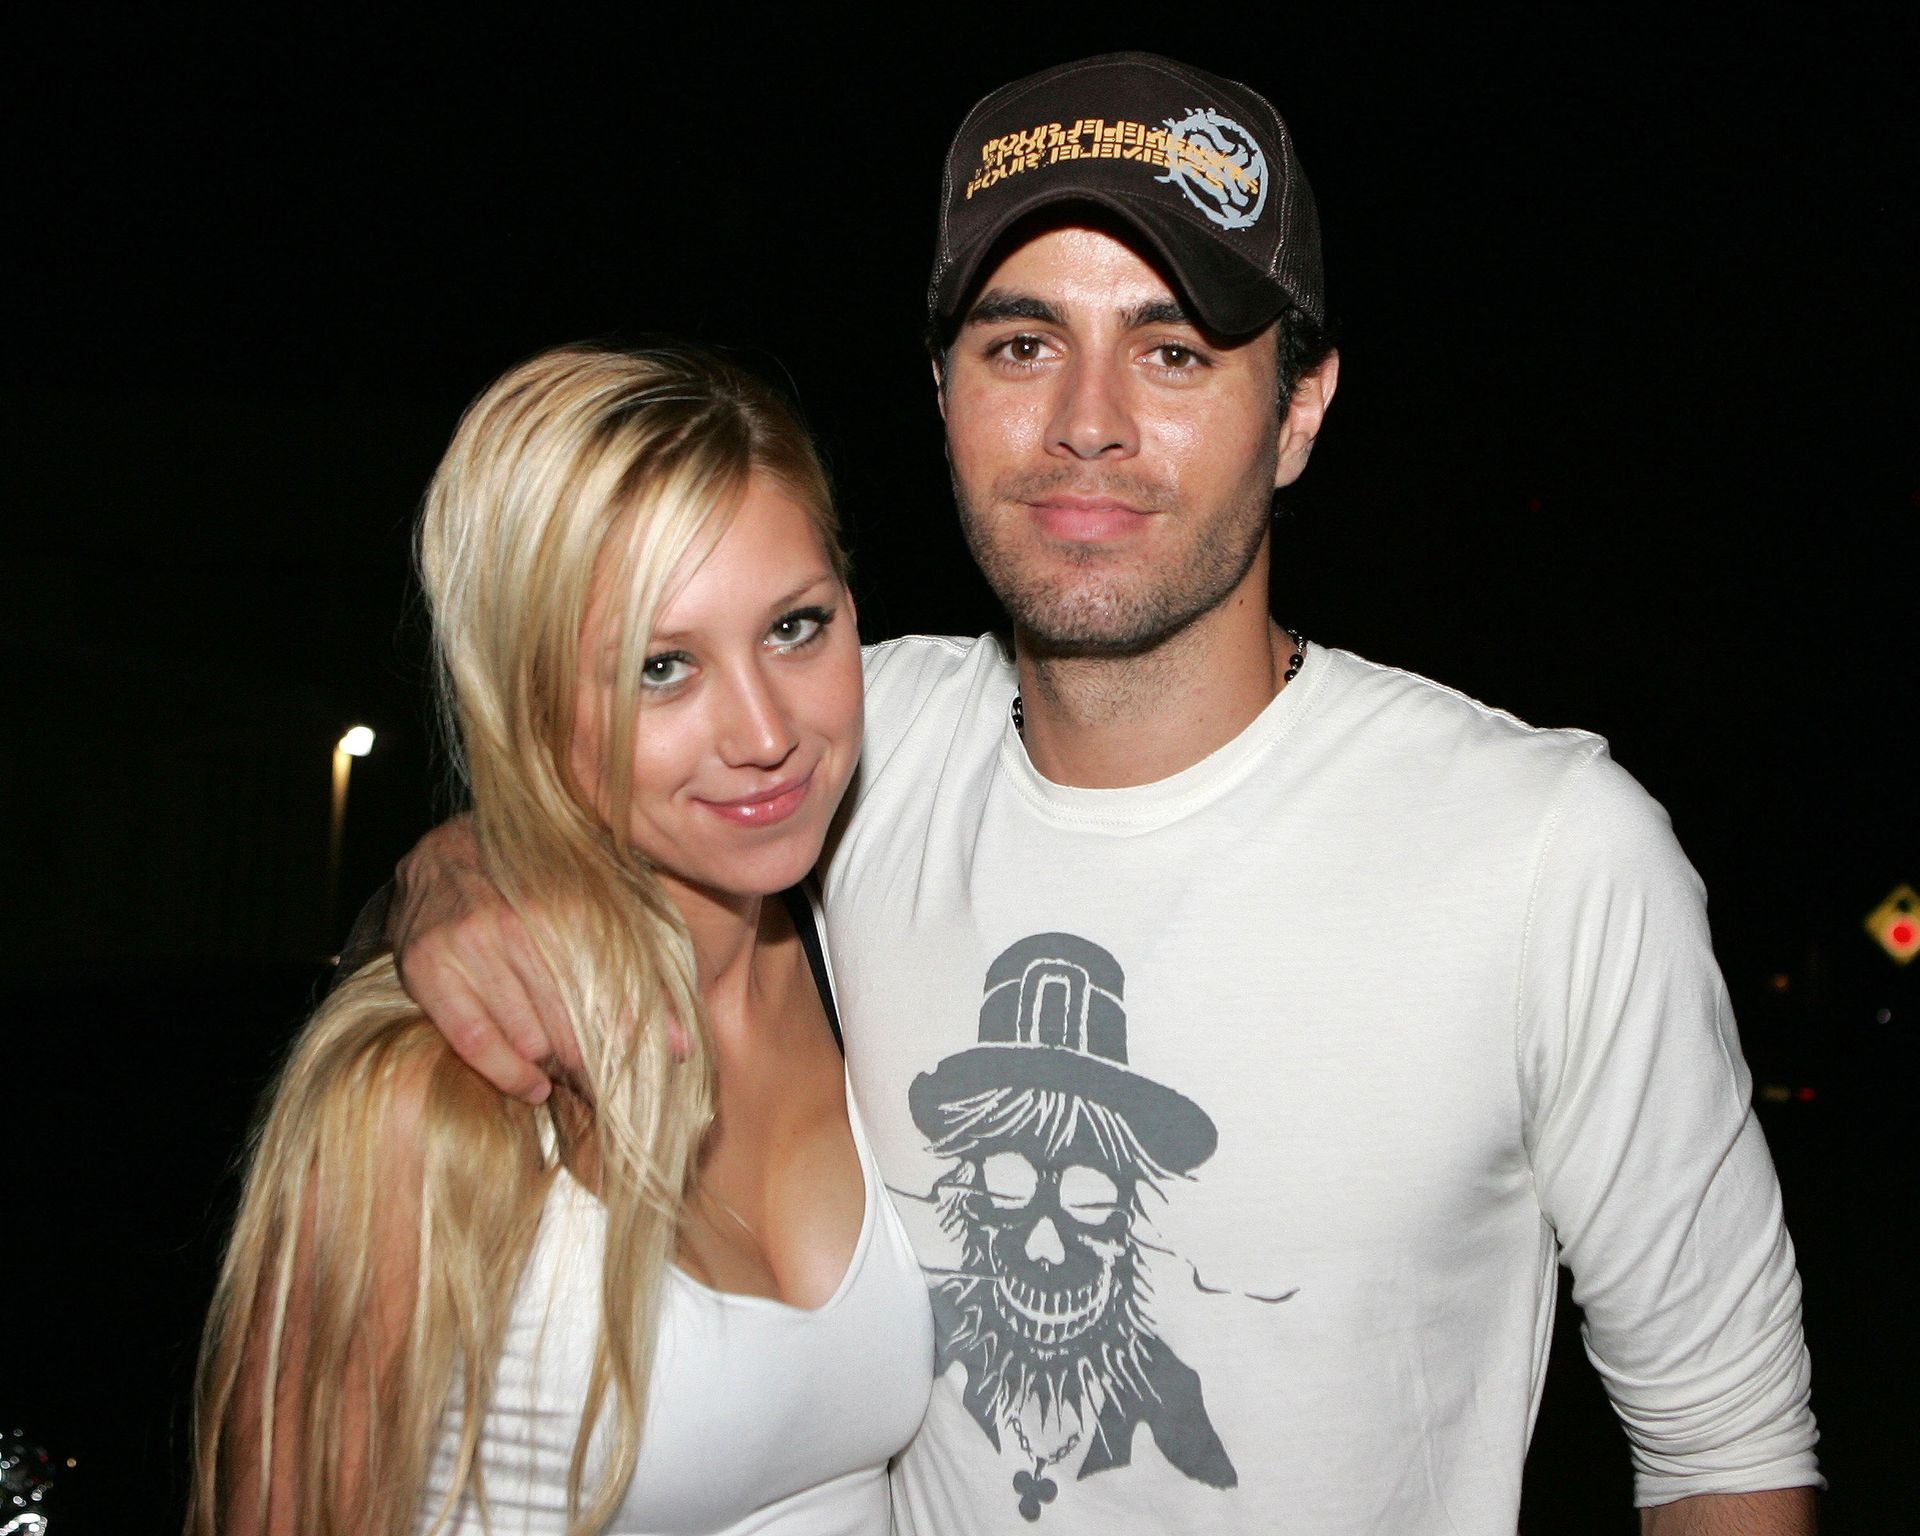 Tennis player Anna Kournikova and singer Enrique Iglesias leave Big Pink restaurant during the early morning hours on June 16, 2006 | Photo: Getty Images